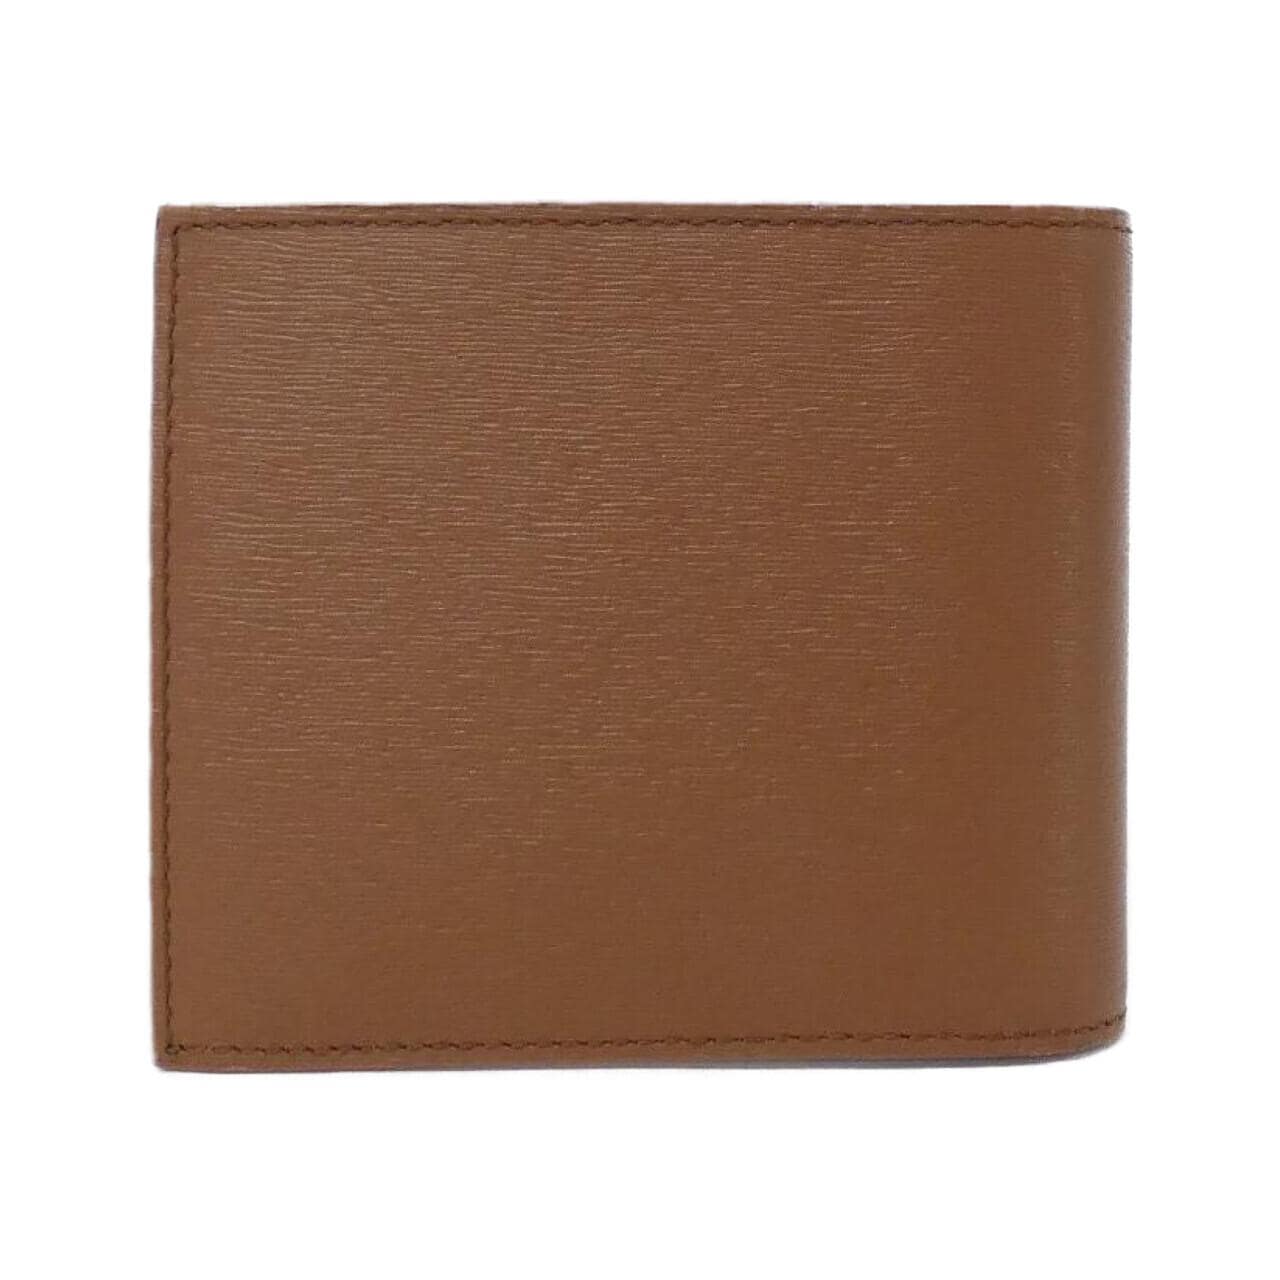 [BRAND NEW] Paul Smith 4833 Wallet